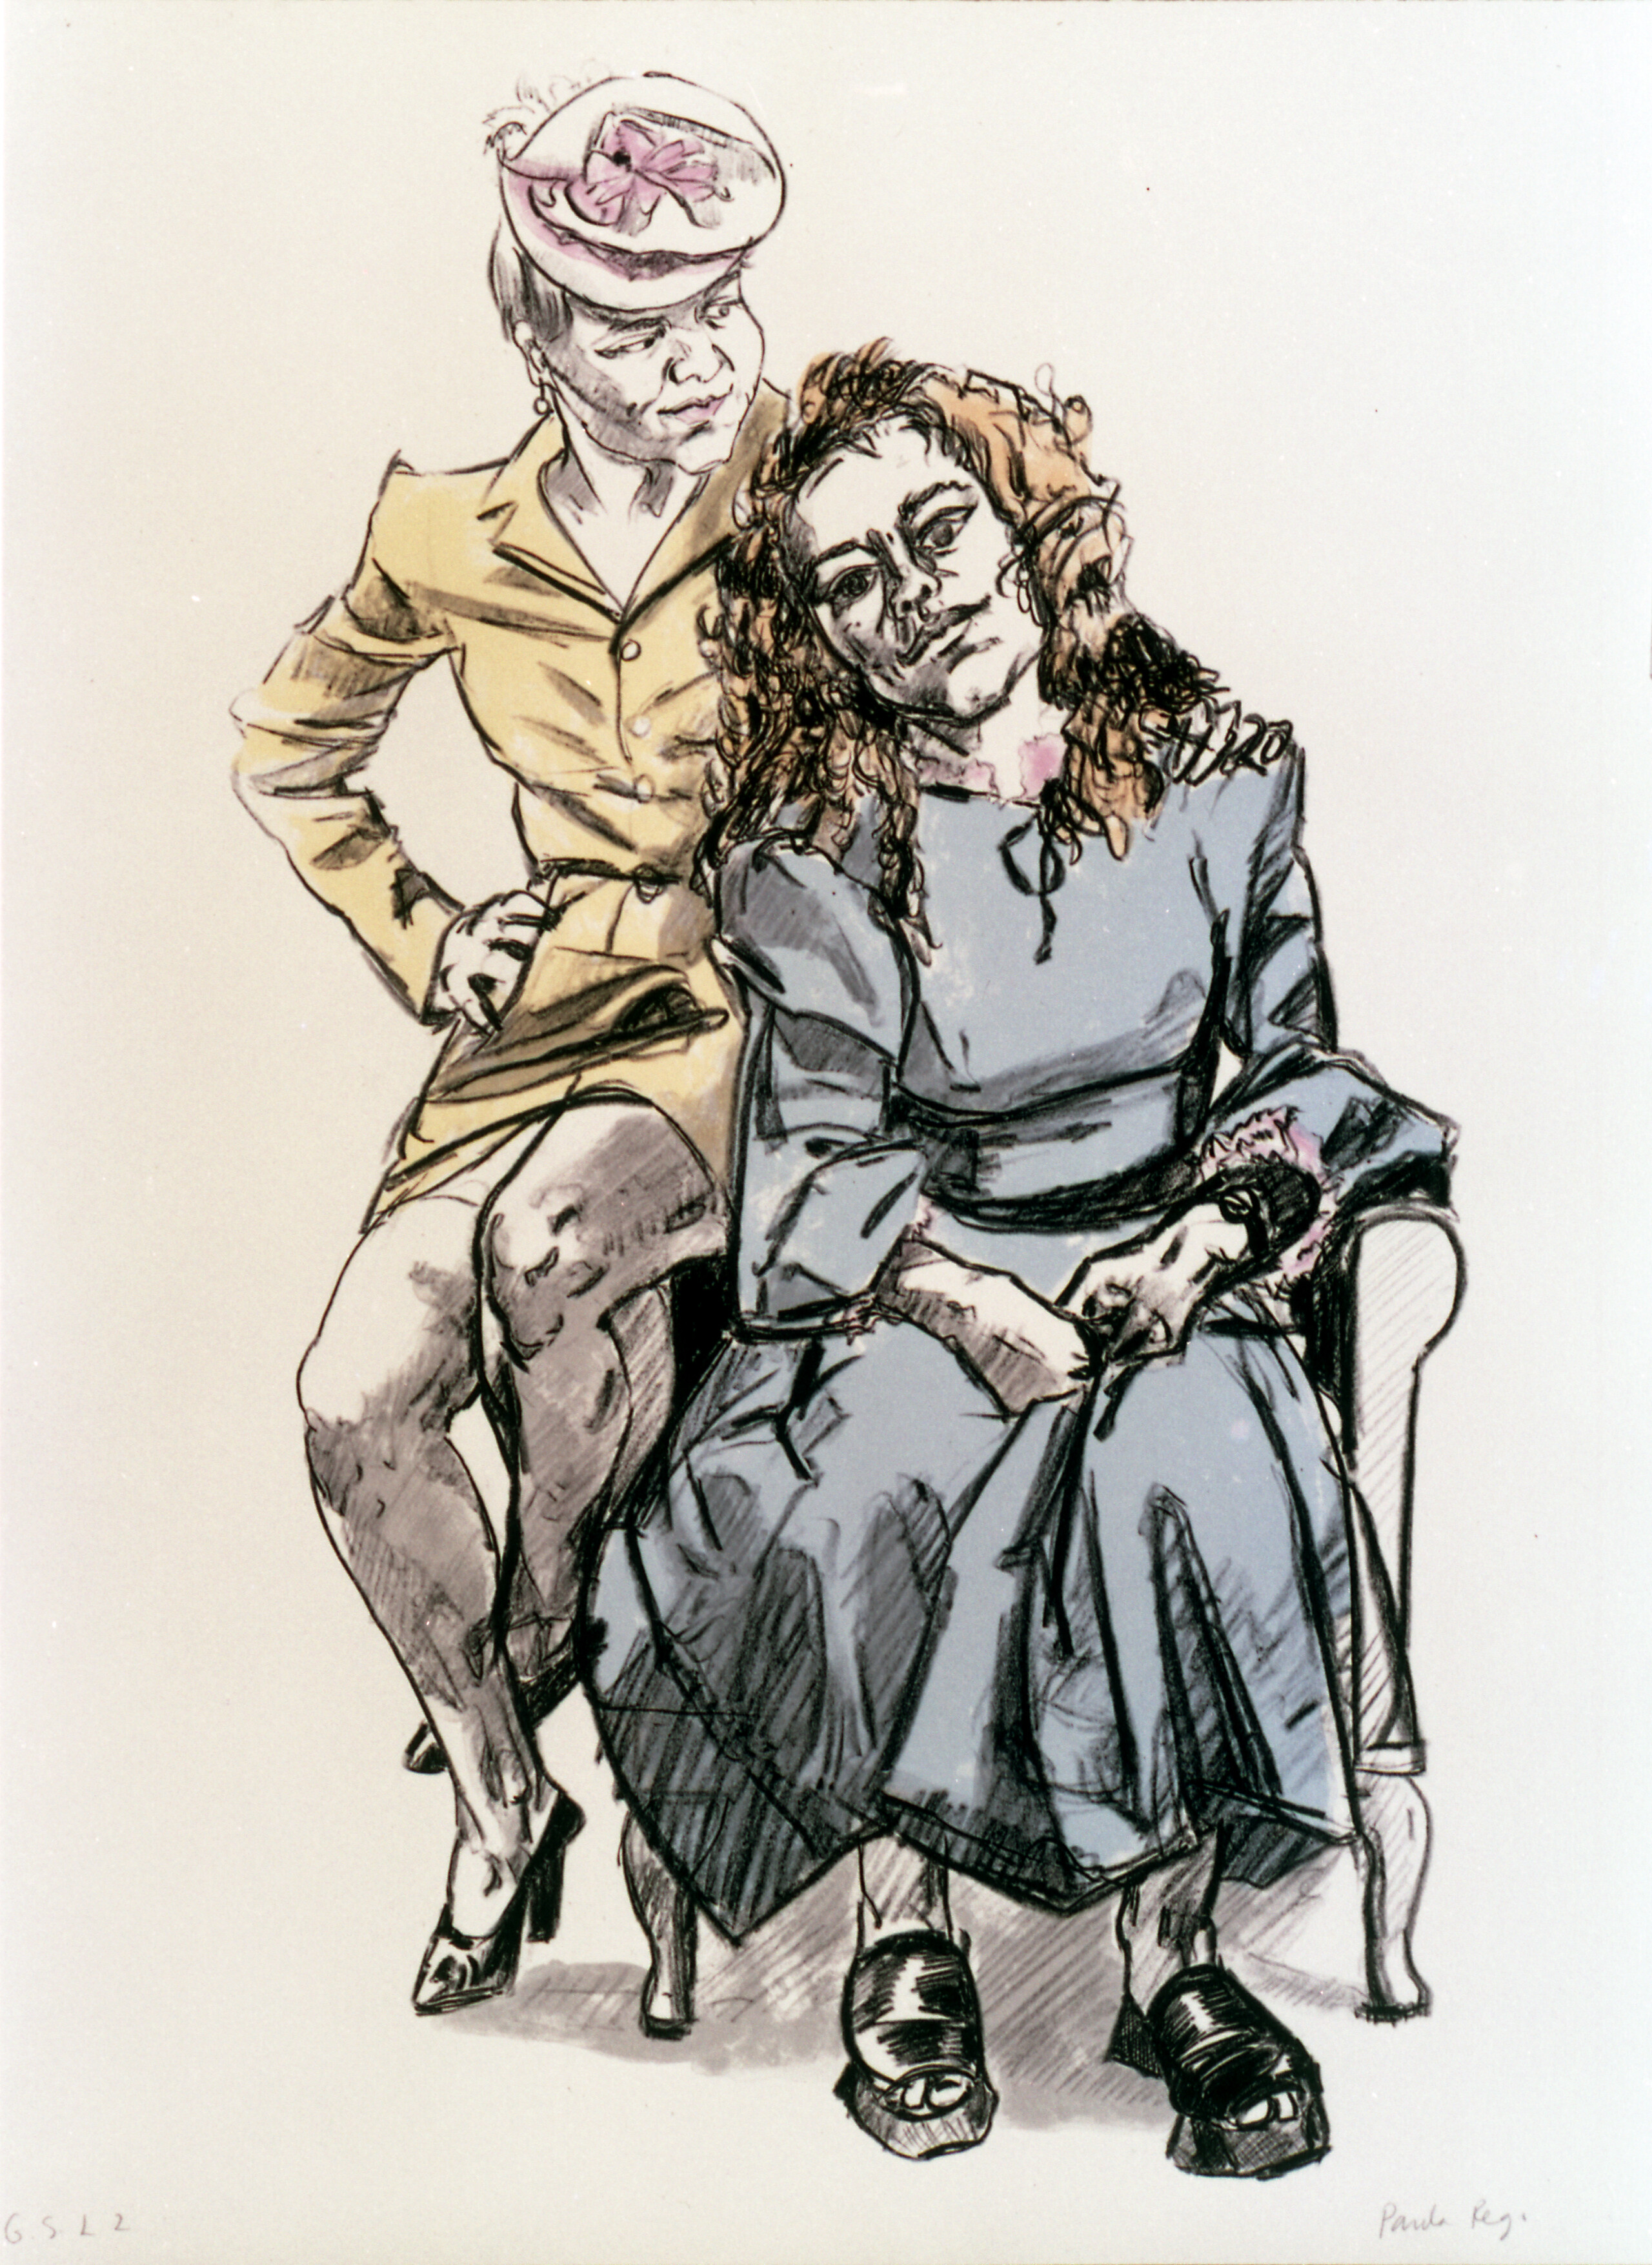 A black line drawing of two light-skinned women. One woman in a light blue dress with curly brown hair sits on a chair and gazes at the viewer, while the other, older woman in a yellow dress and dainty pink hat sits on the chair’s armrest with her hand on the woman in blue’s shoulder.